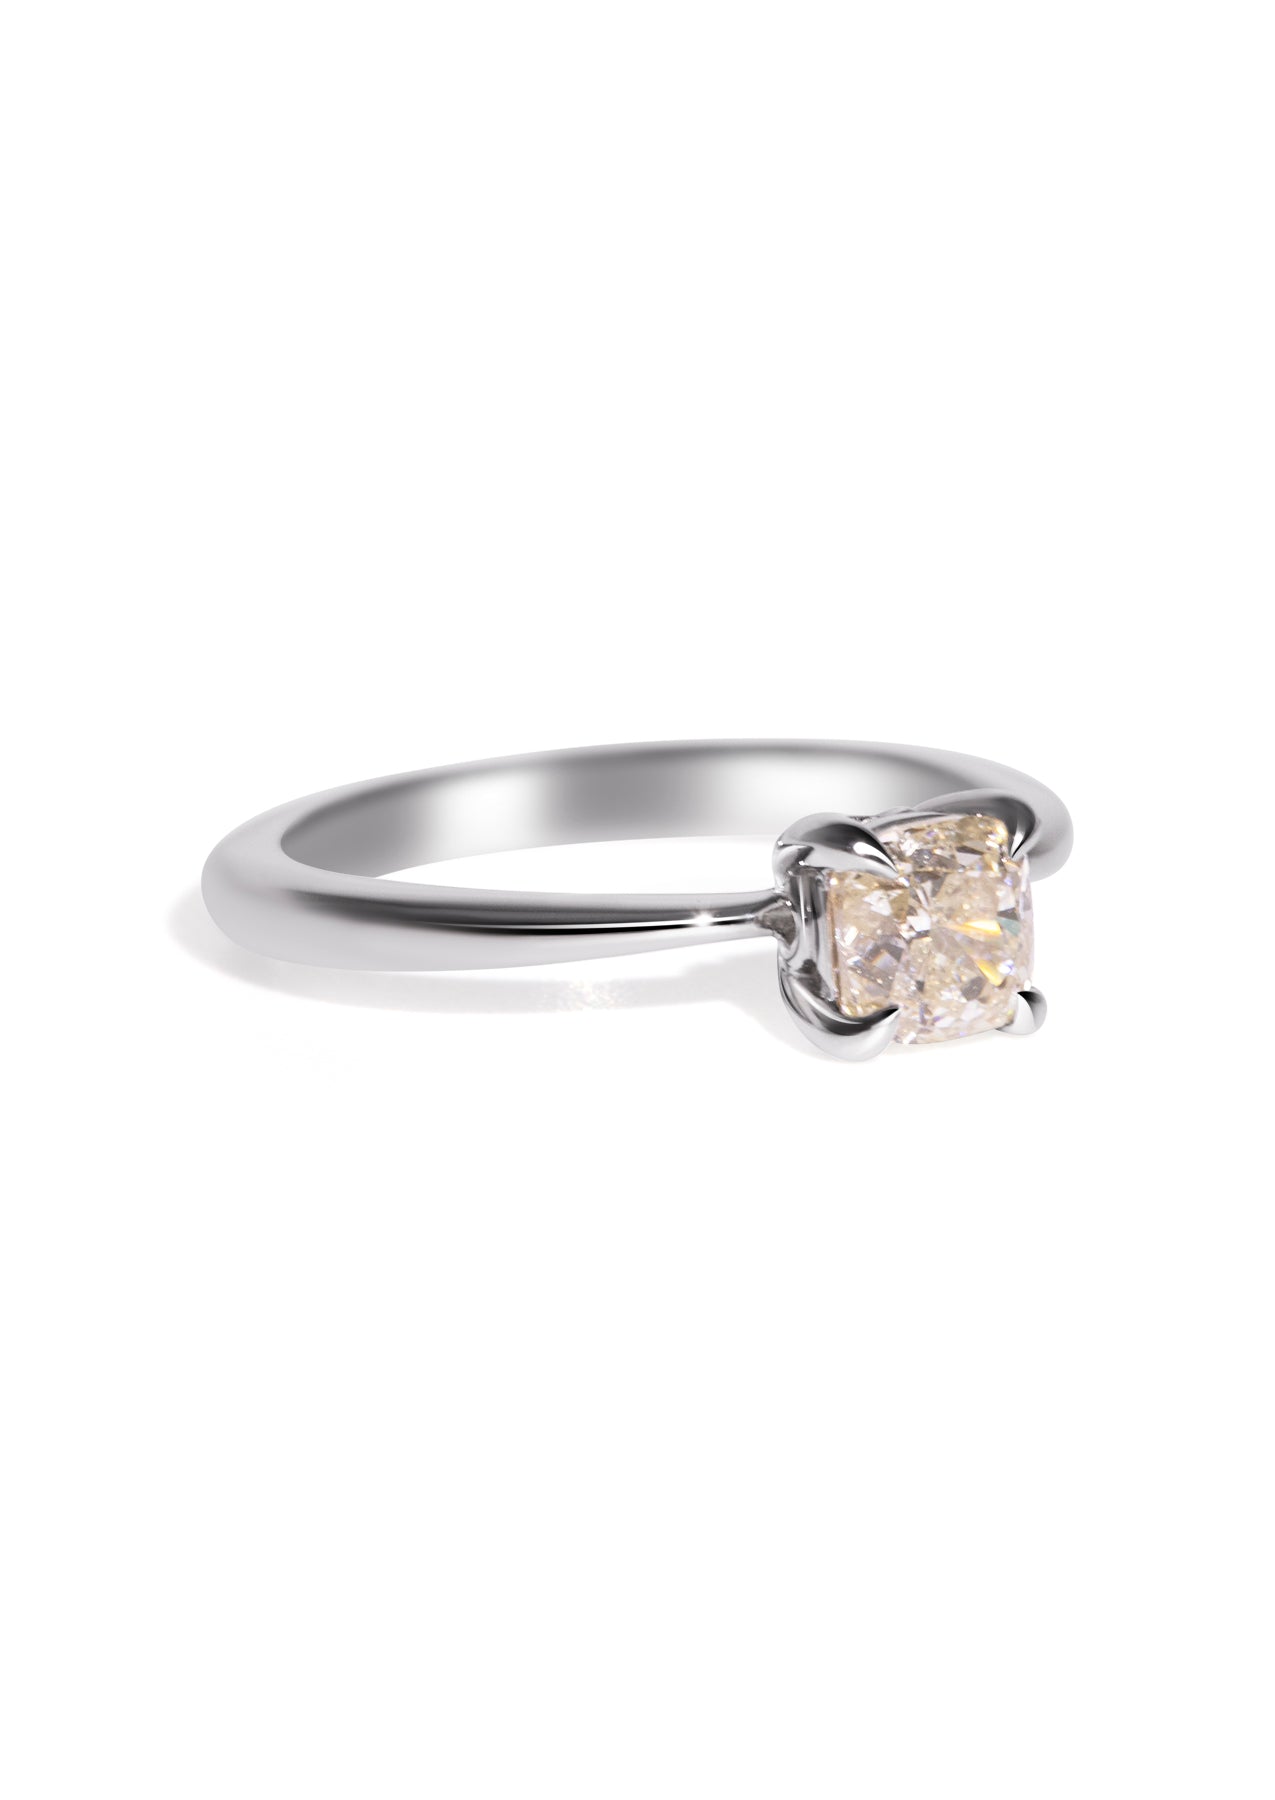 The June Ring with 1.01ct Cushion Diamond